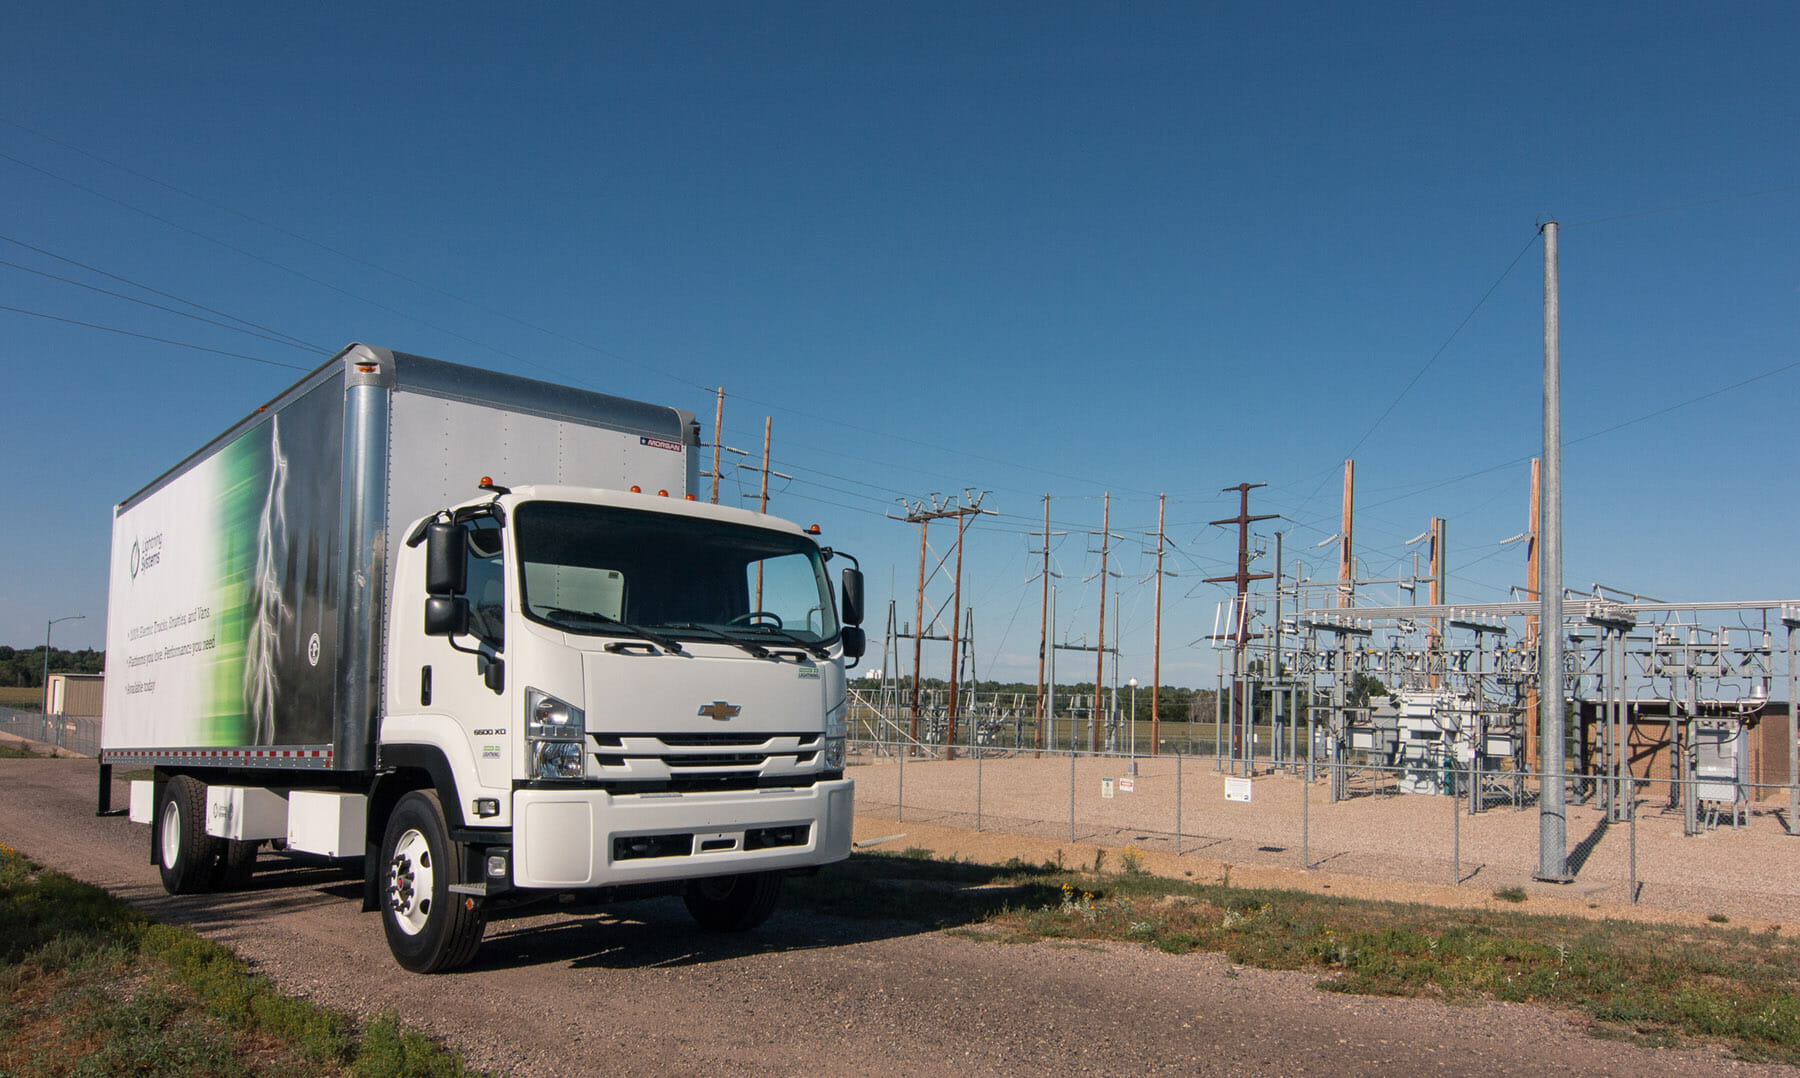 LS GM6500 by an electric substation